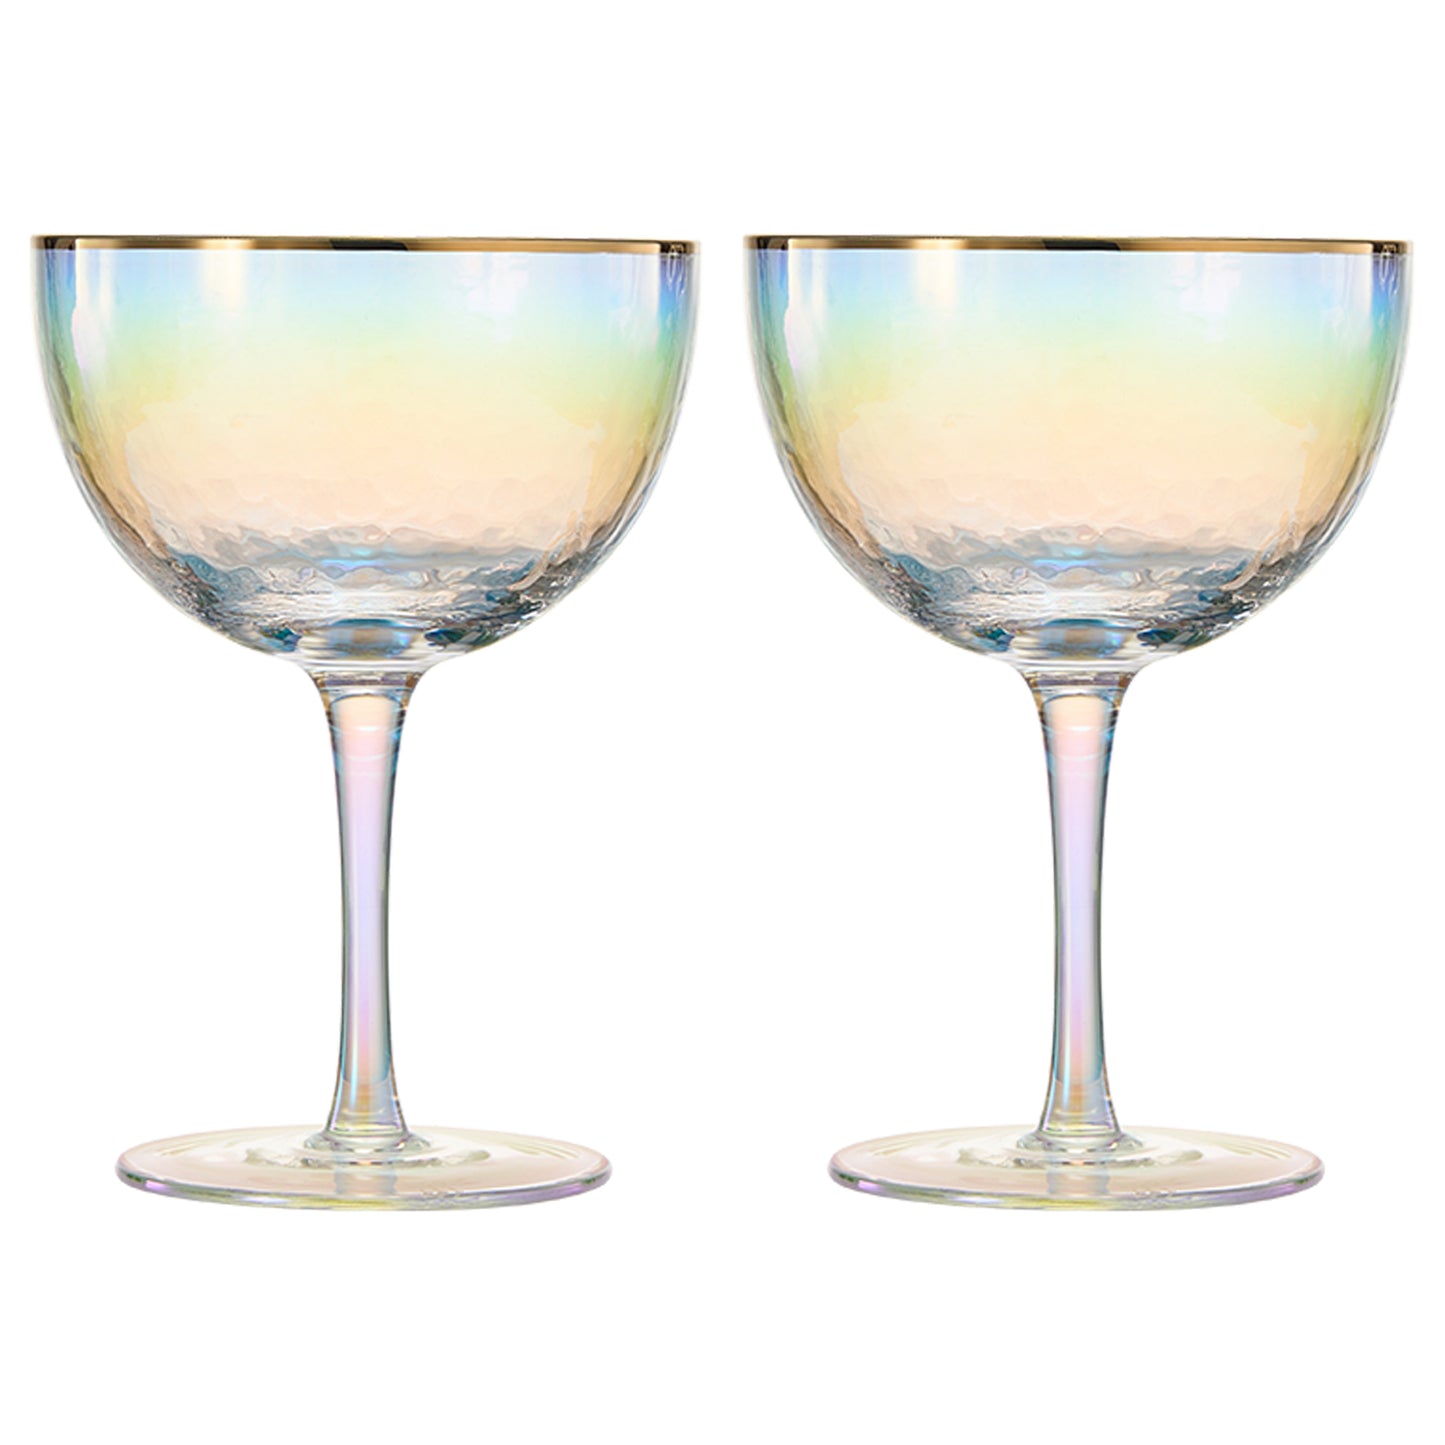 Dulce Champagne Coupe Cocktail Glassware, Set of 2